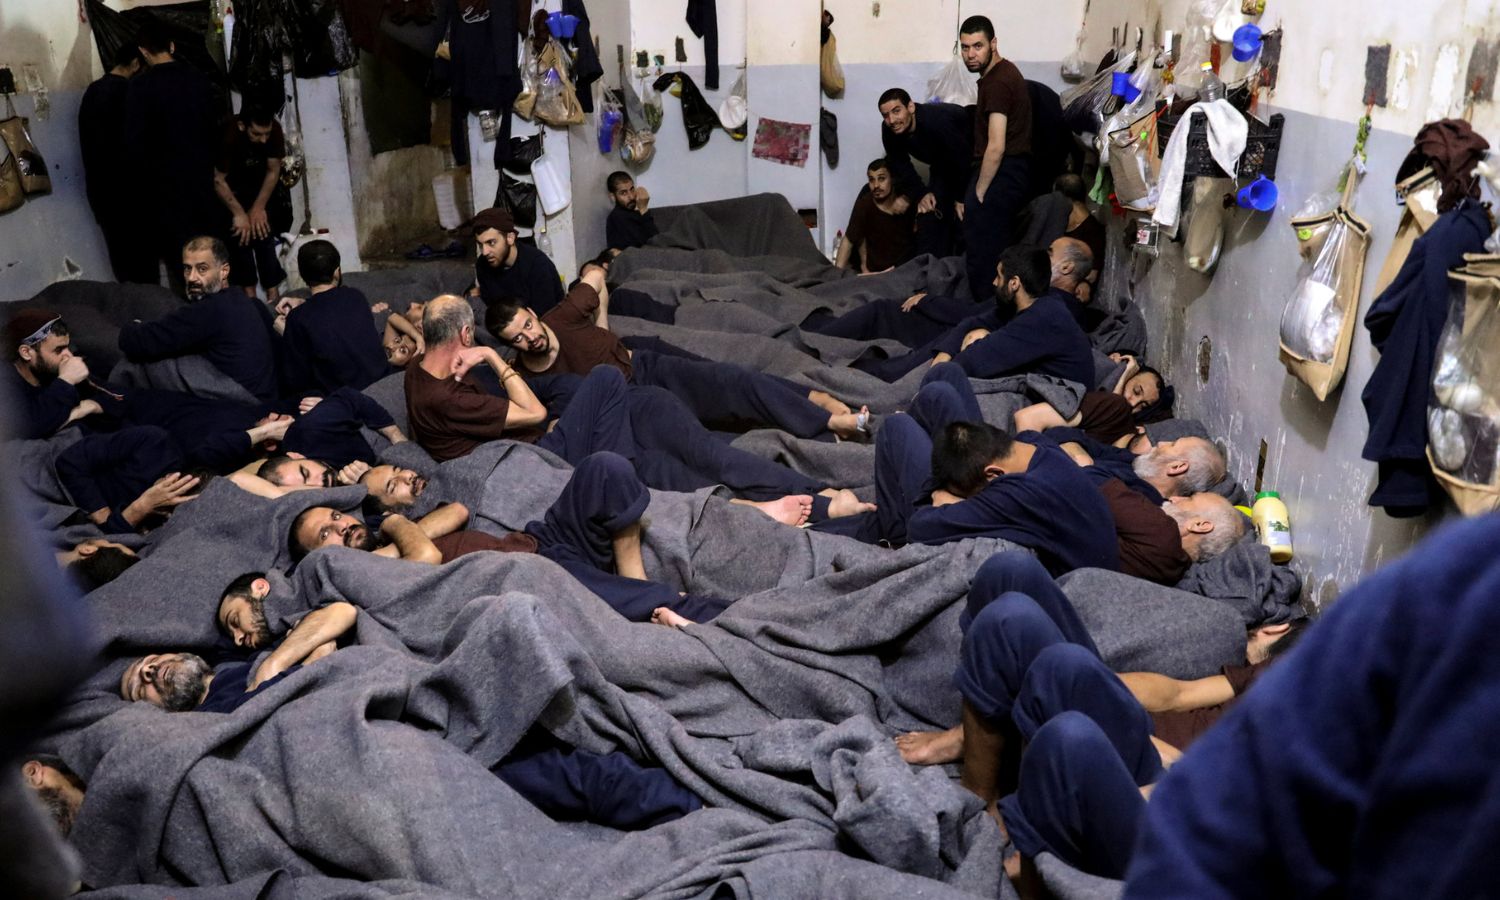 Prisoners suspected of belonging to the Islamic State group in a jail in northeastern al-Hasakah governorate - January 2020 (Reuters/Goran Tomasevic)